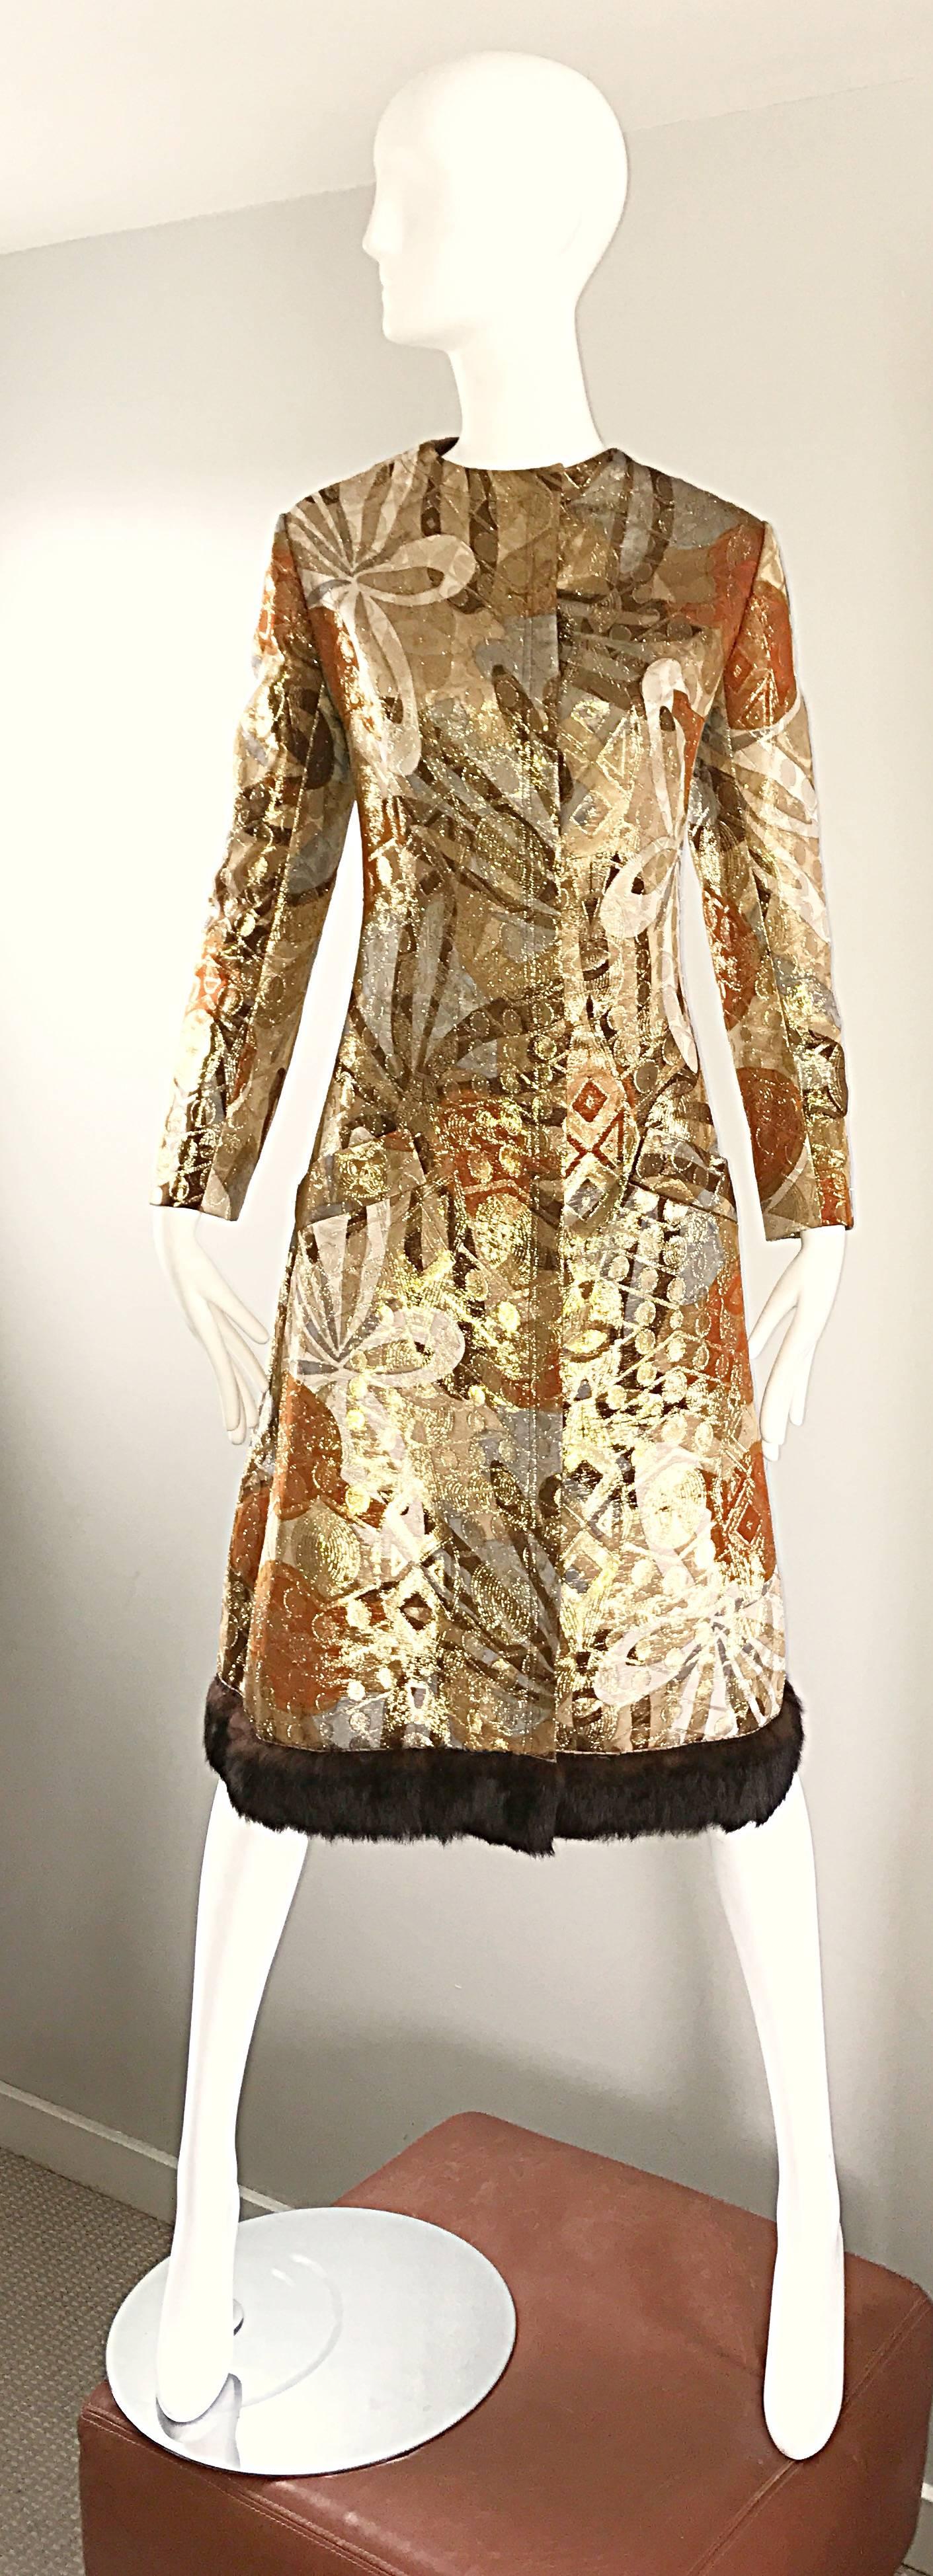 Sensational vintage 1960s BILL BLASS metallic silk A-Line dress or jacket! Features fabulous abstract prints in warm hues of gold, brown, silver, and bronze throughout. Soft brown mink fur trim along the hem. Pockets at both sides of the hips.